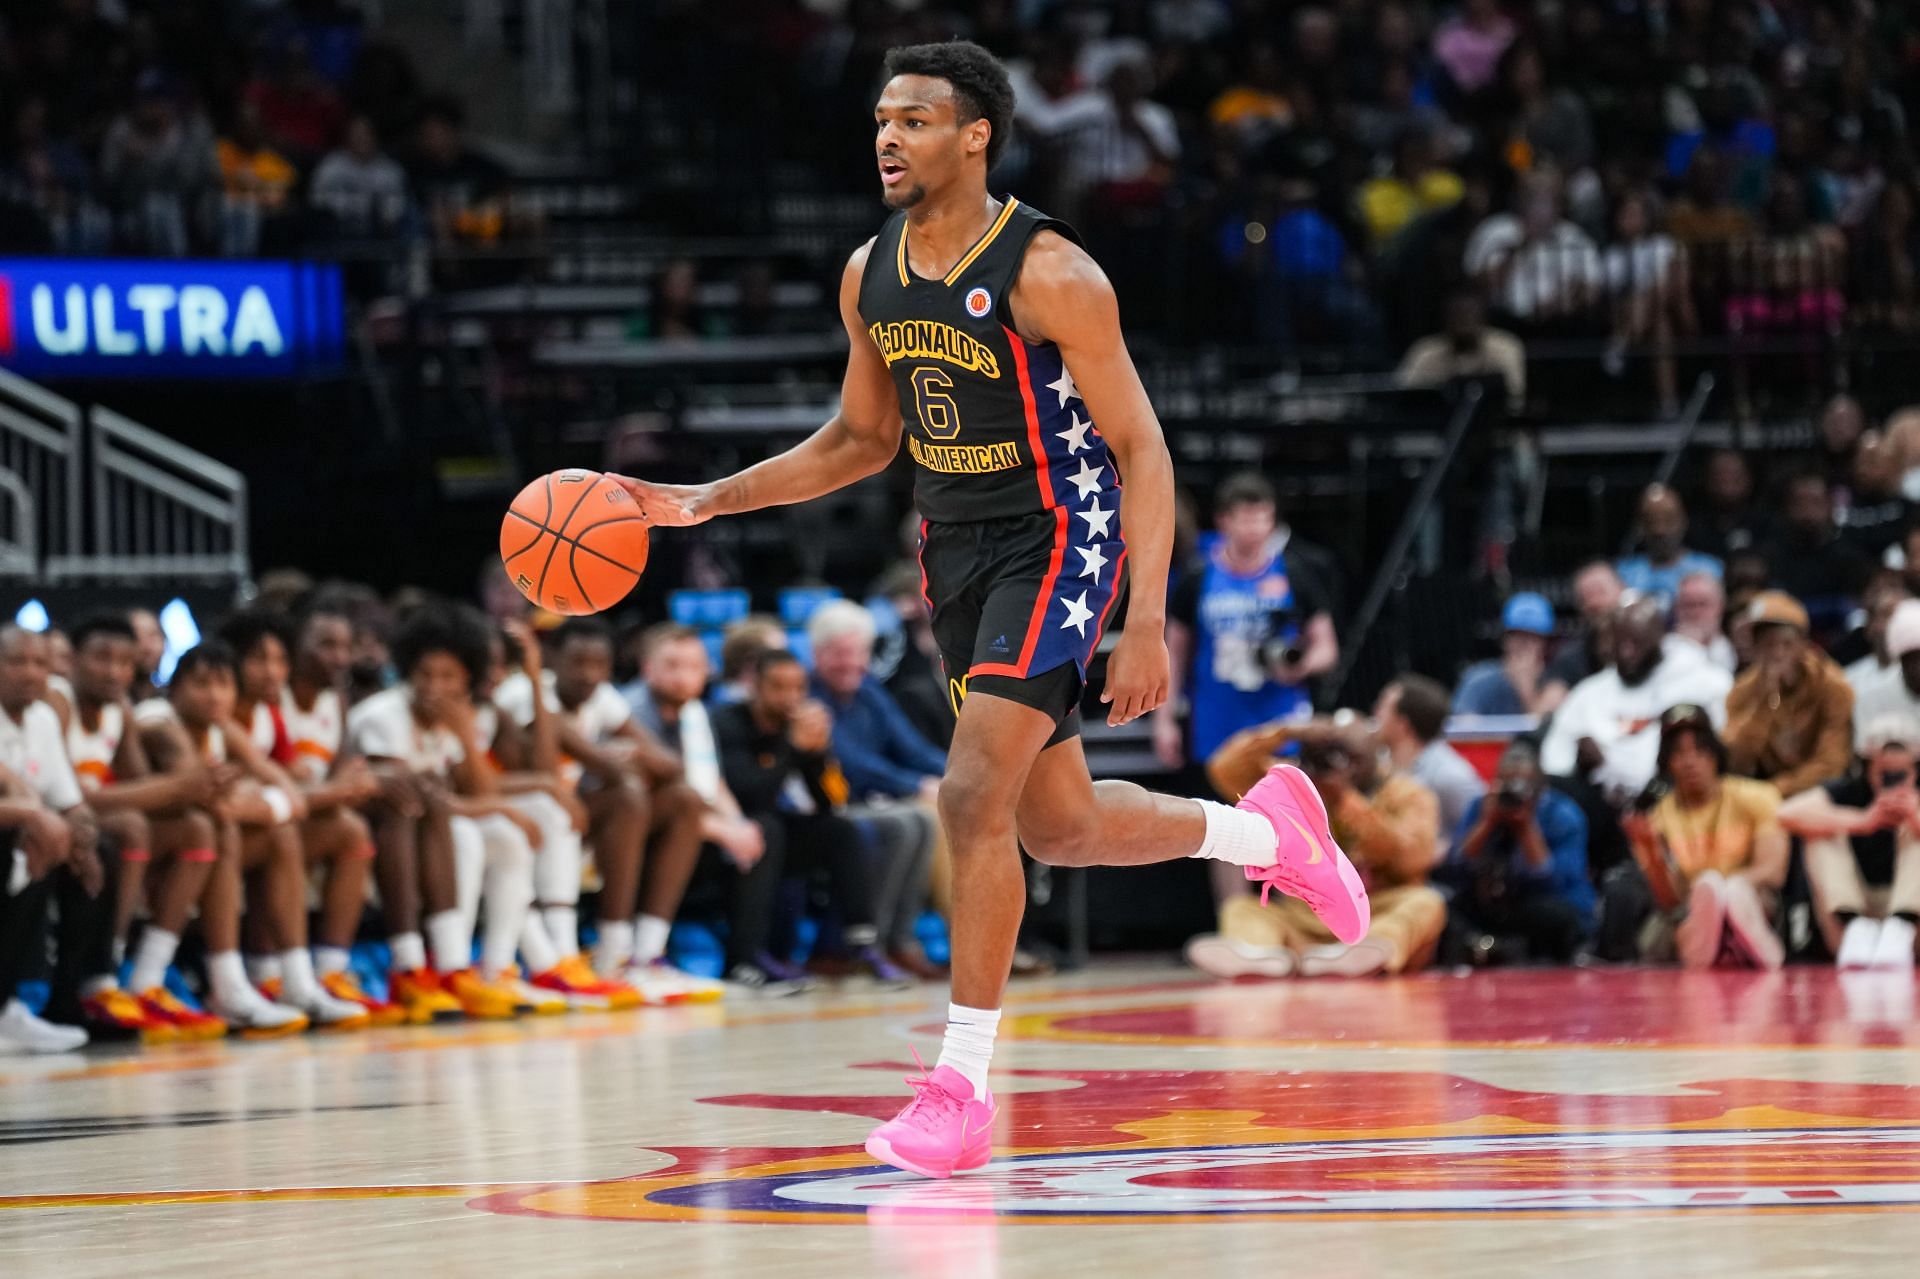 Projections for 2018 NBA Draft lottery picks - Basketball Recruiting